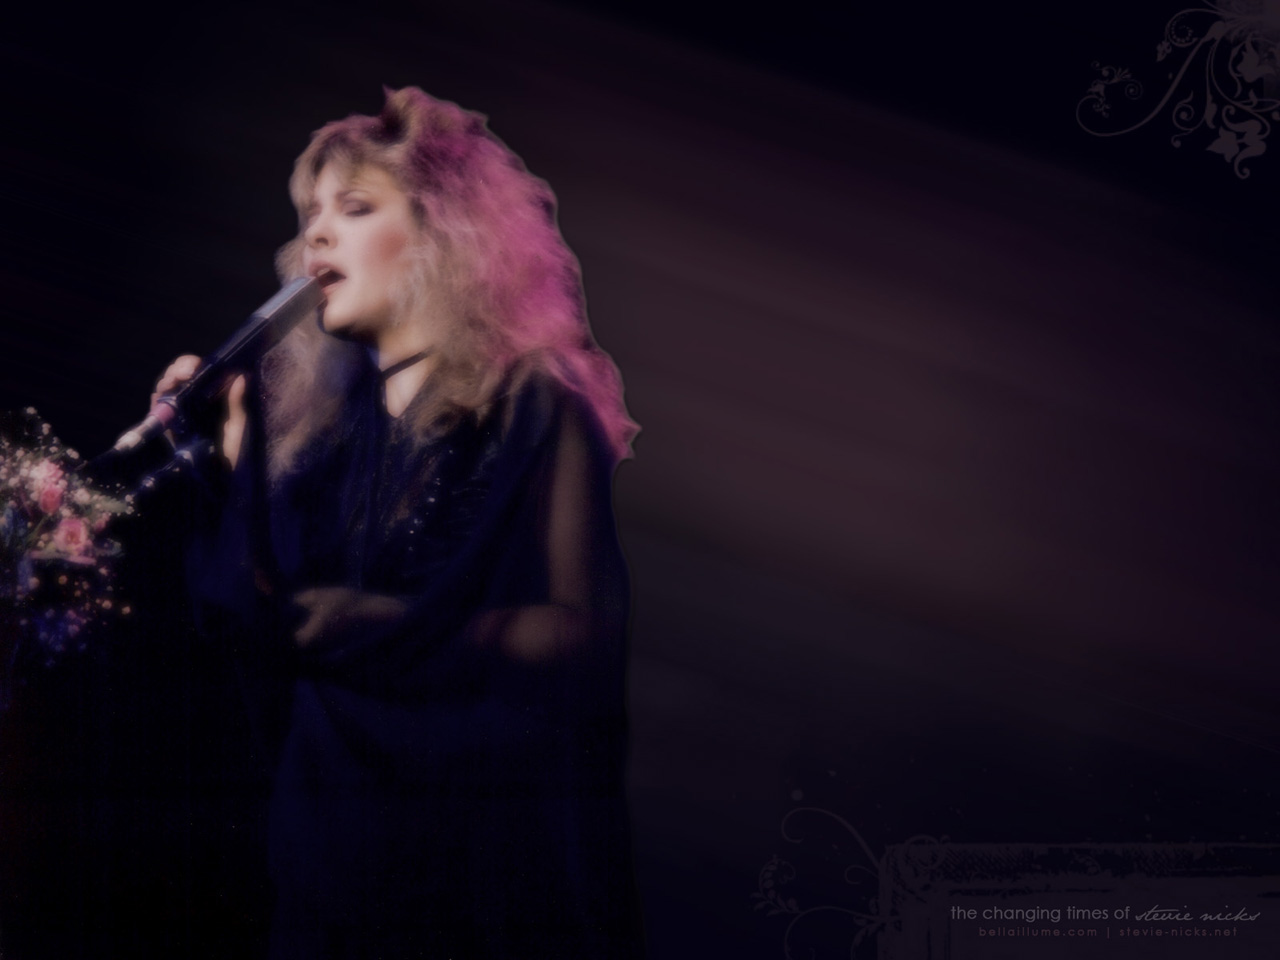 STEVIE NICKS THE SITE Wallpapers 2011